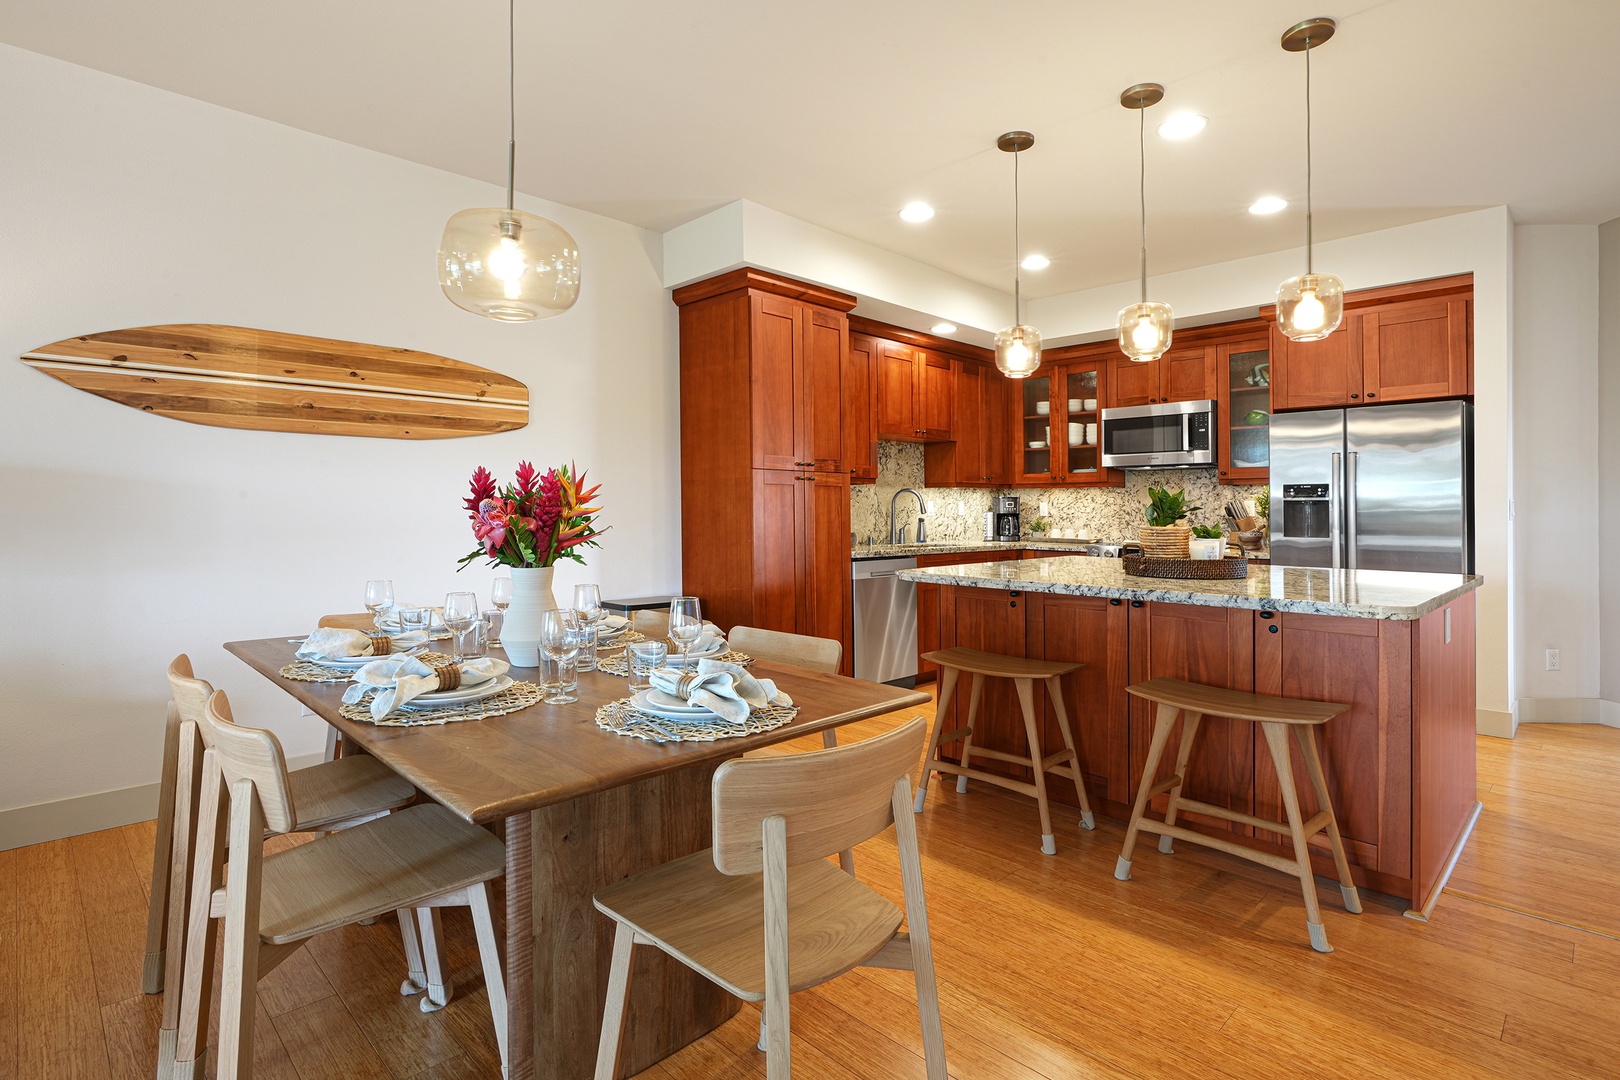 Koloa Vacation Rentals, Pili Mai 11K - The dining area is just off the kitchen and offers seating for 6.